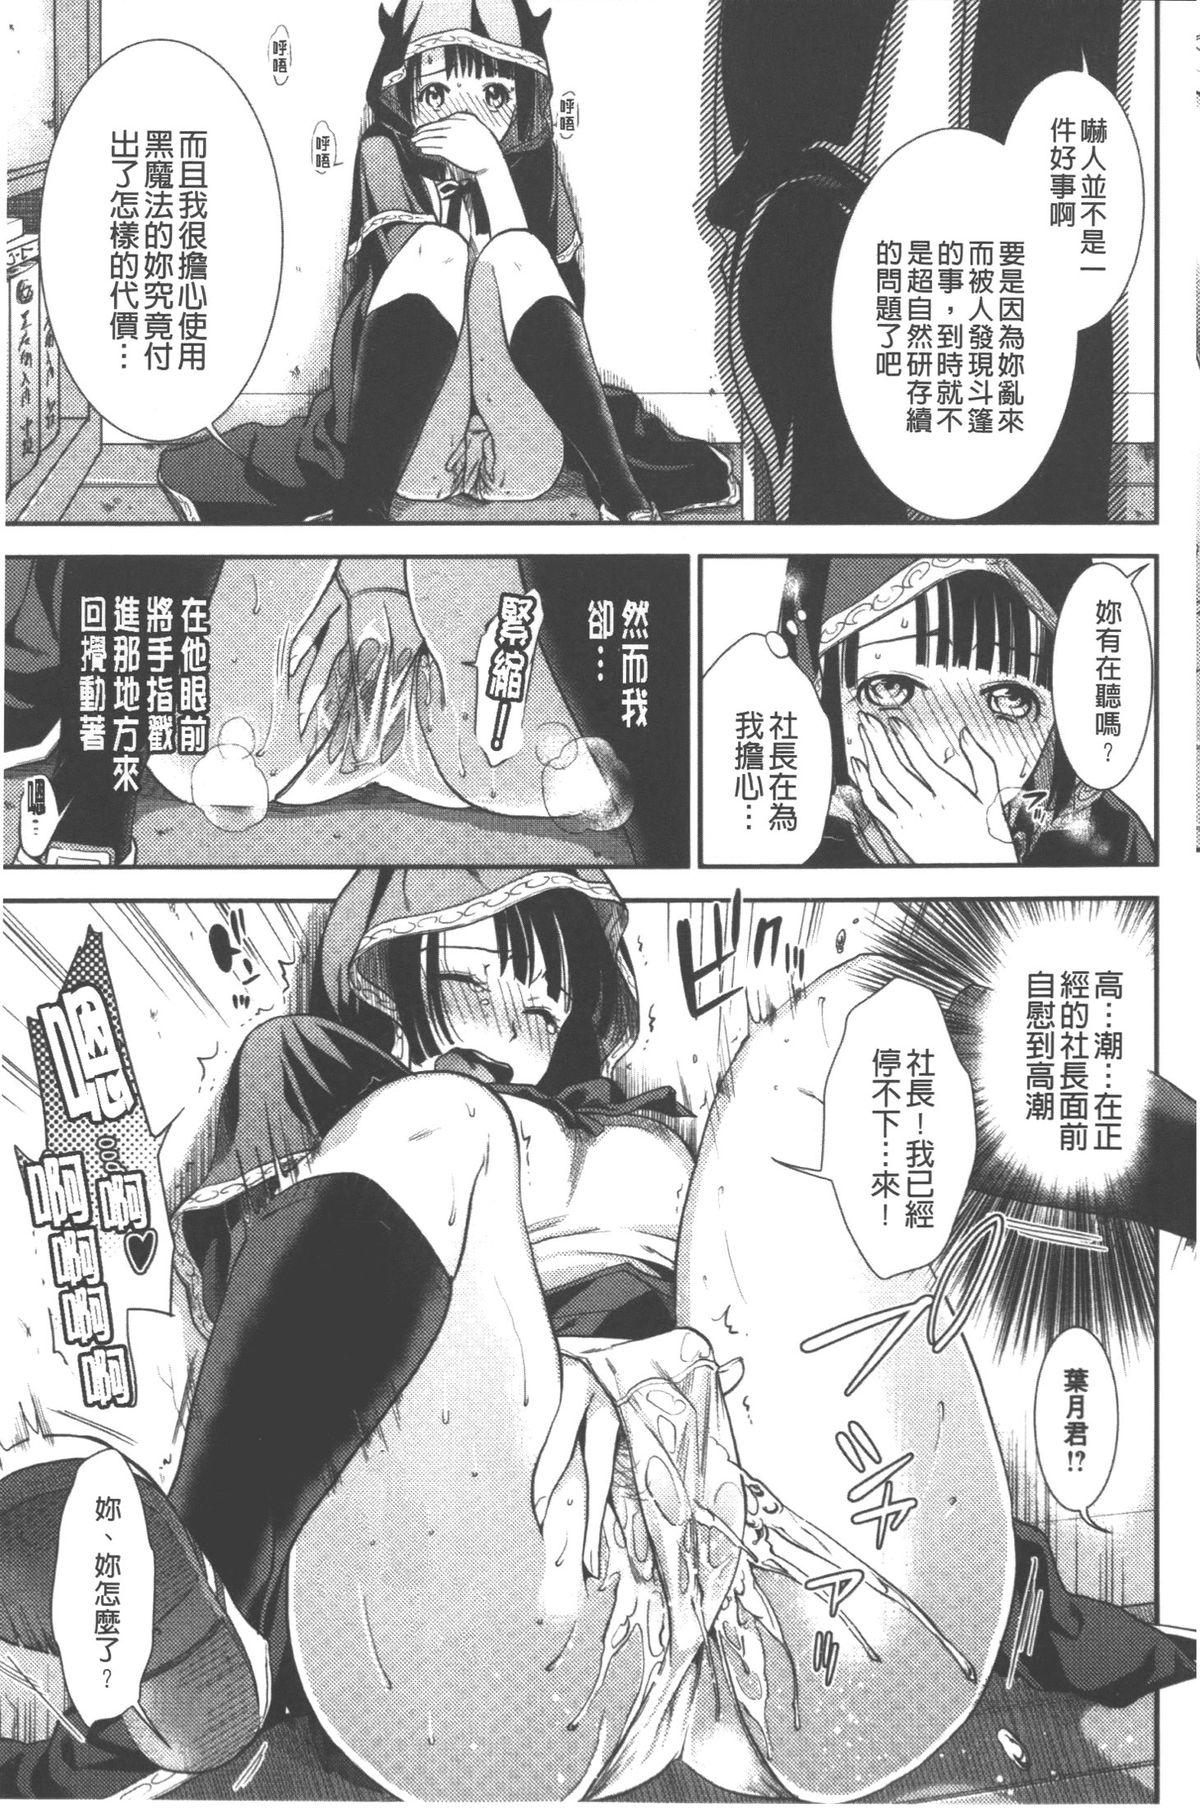 Striptease Hatsujou no Genri - The Principle of Sexual Excitement New - Page 12